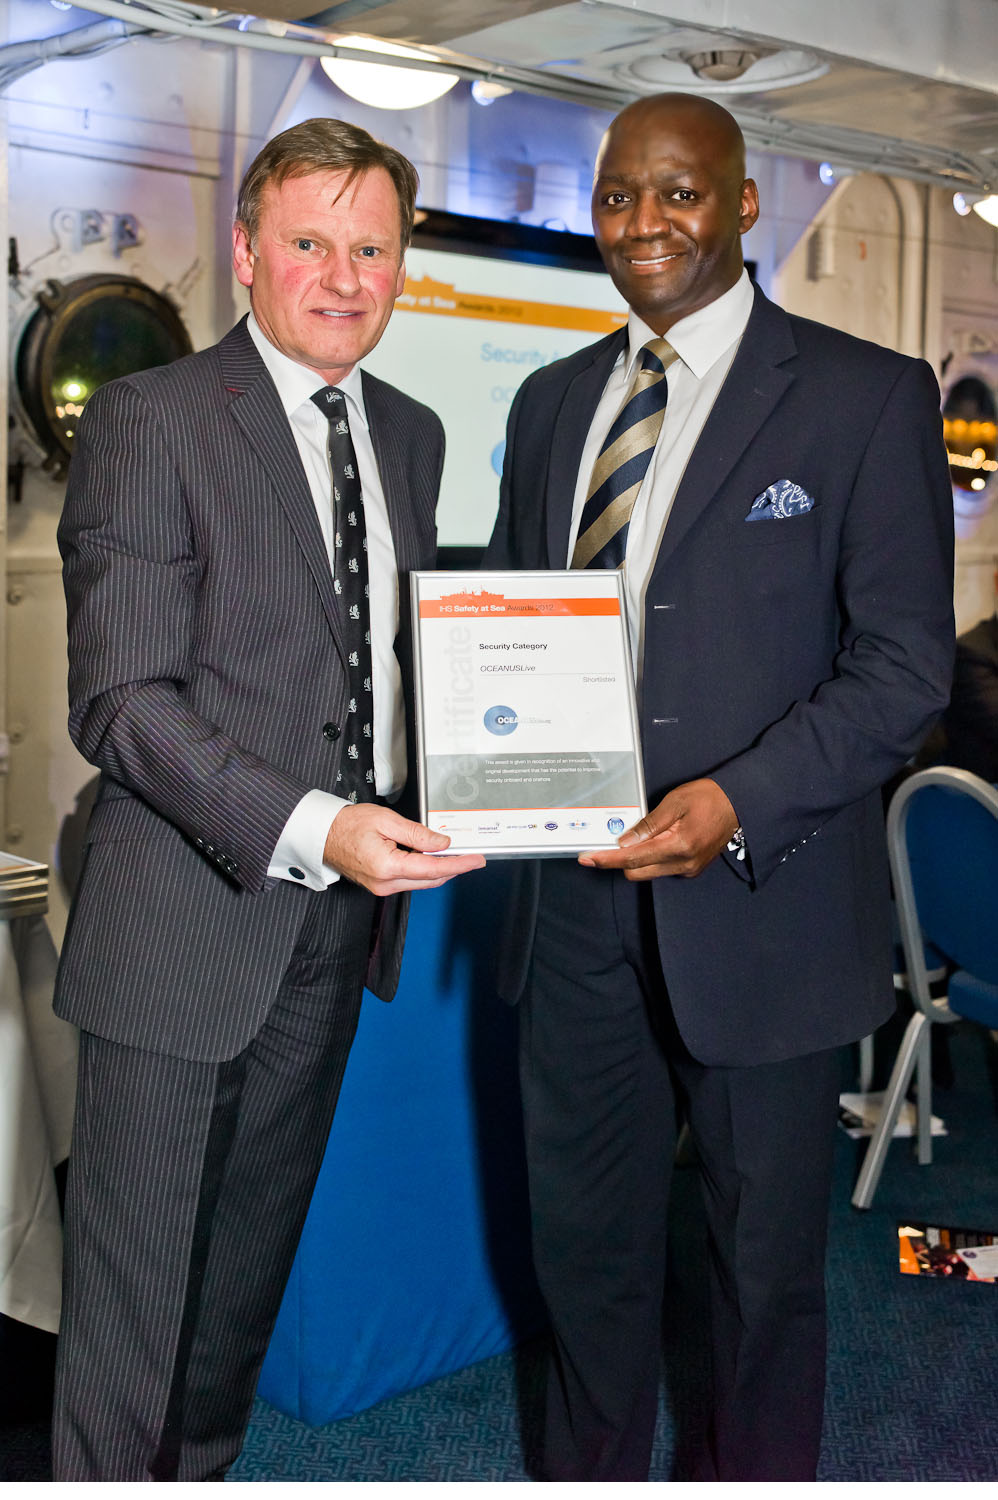 Accepting the Certificate - Photo courtesy of Safety at Sea